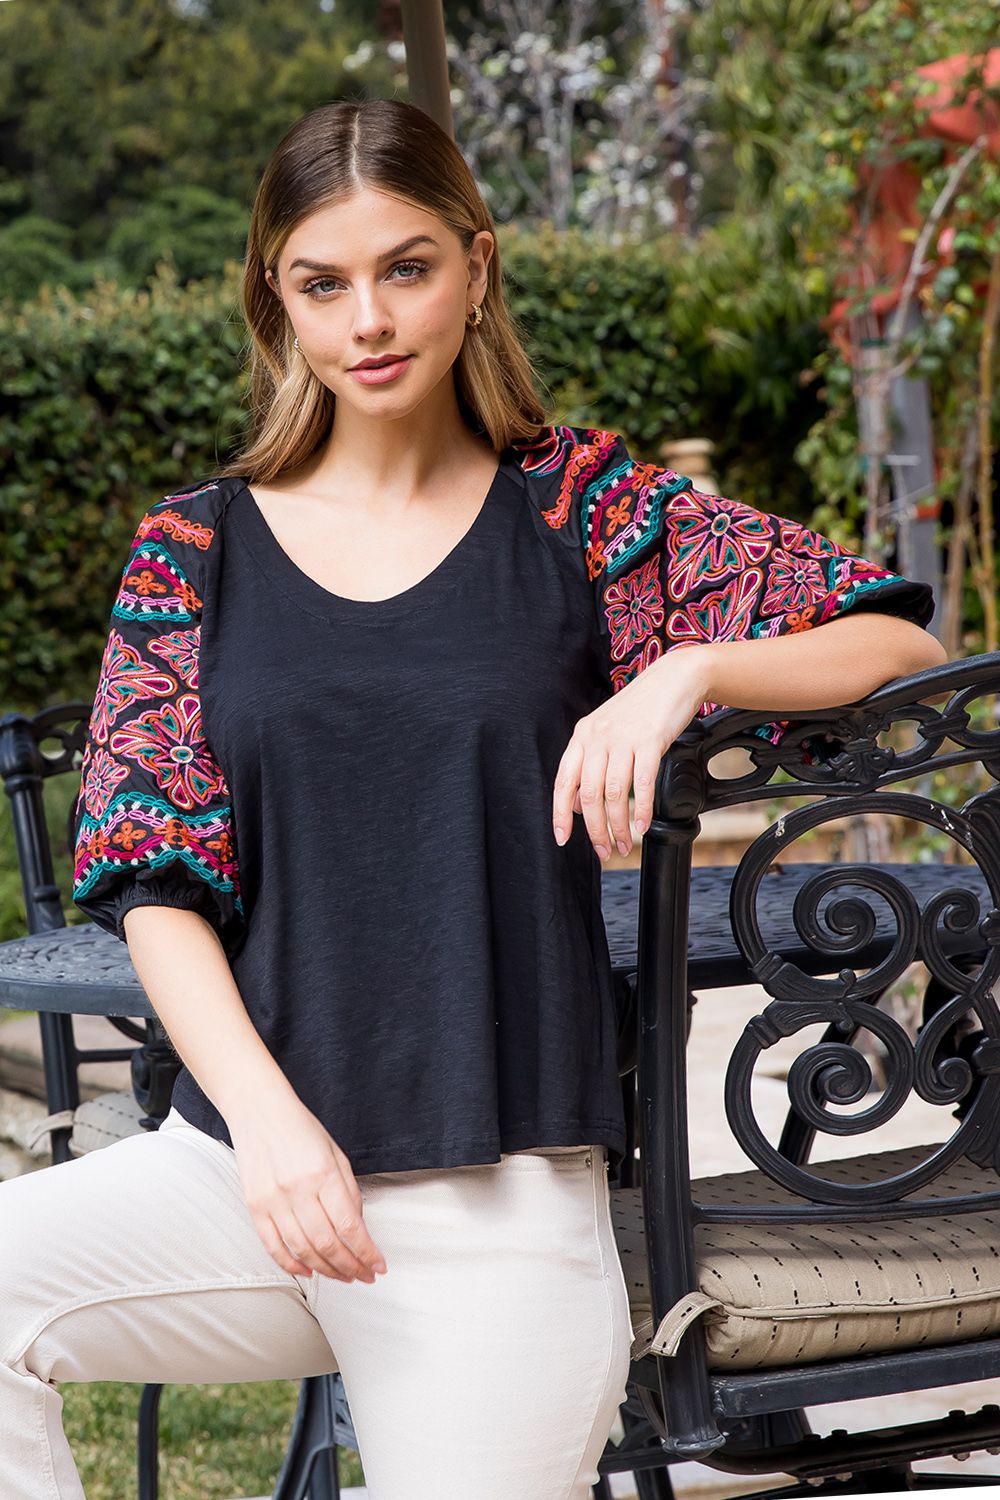 Embroidered Puff Sleeve Top